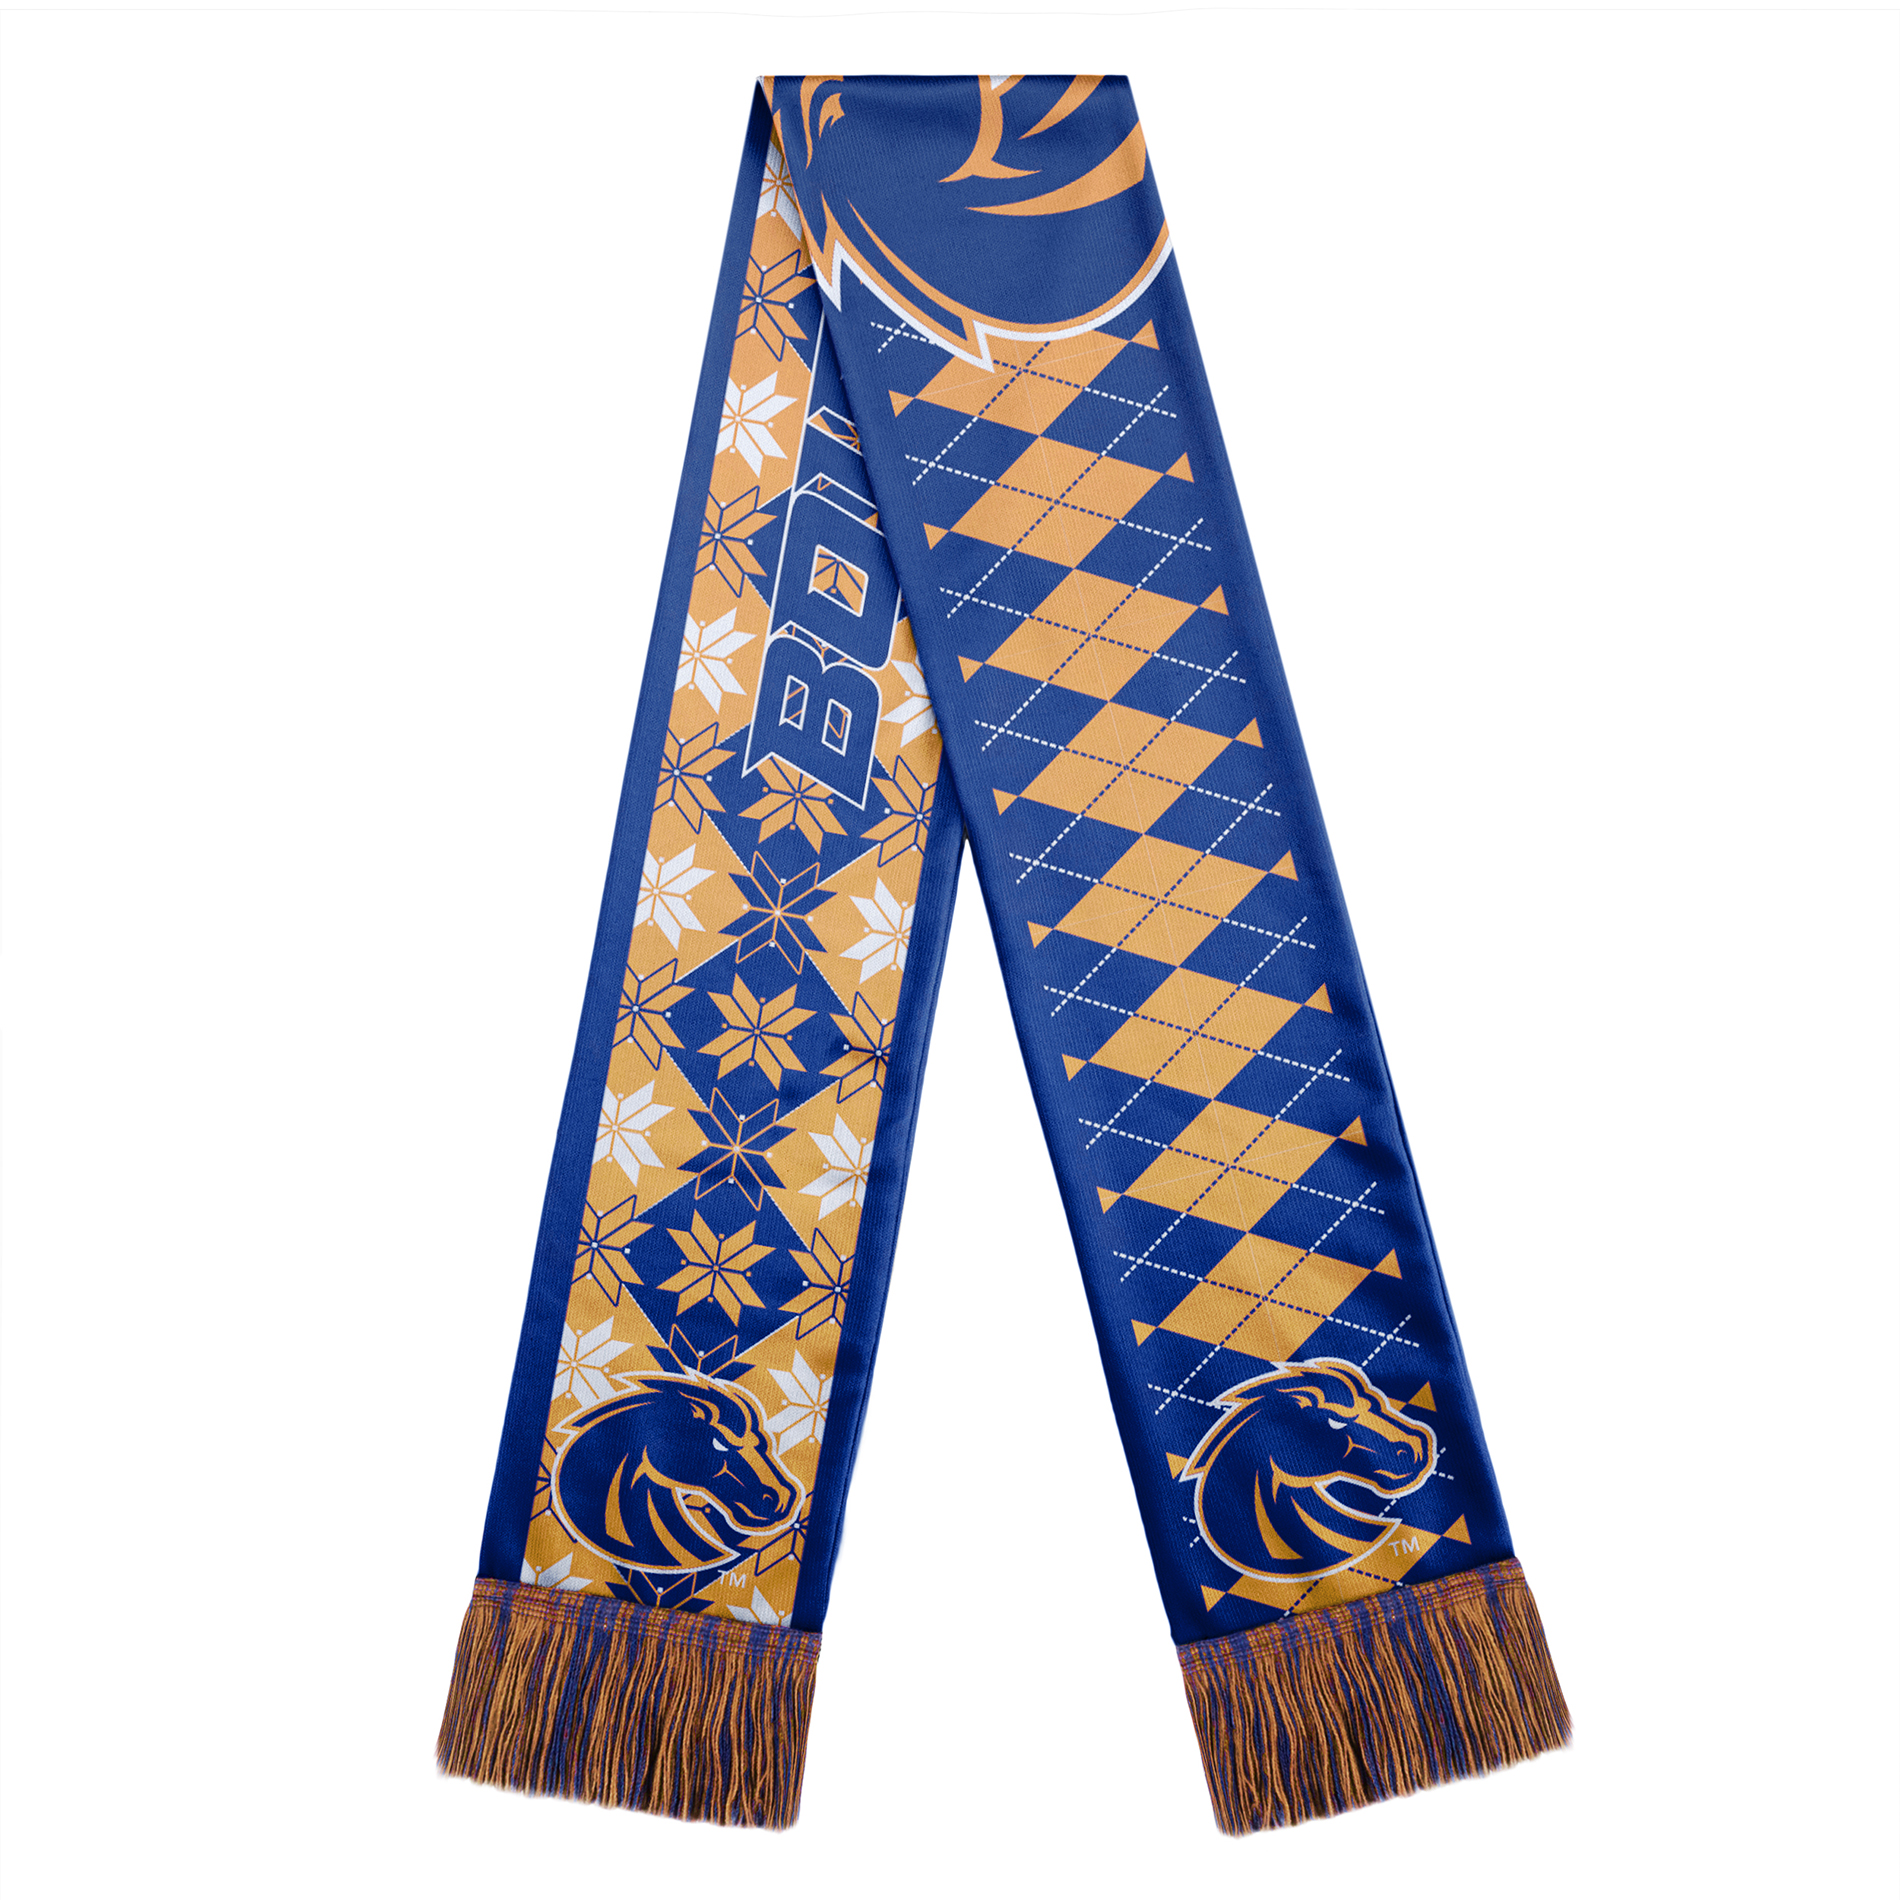 NCAA Boise State Broncos Reversible Ugly Scarf